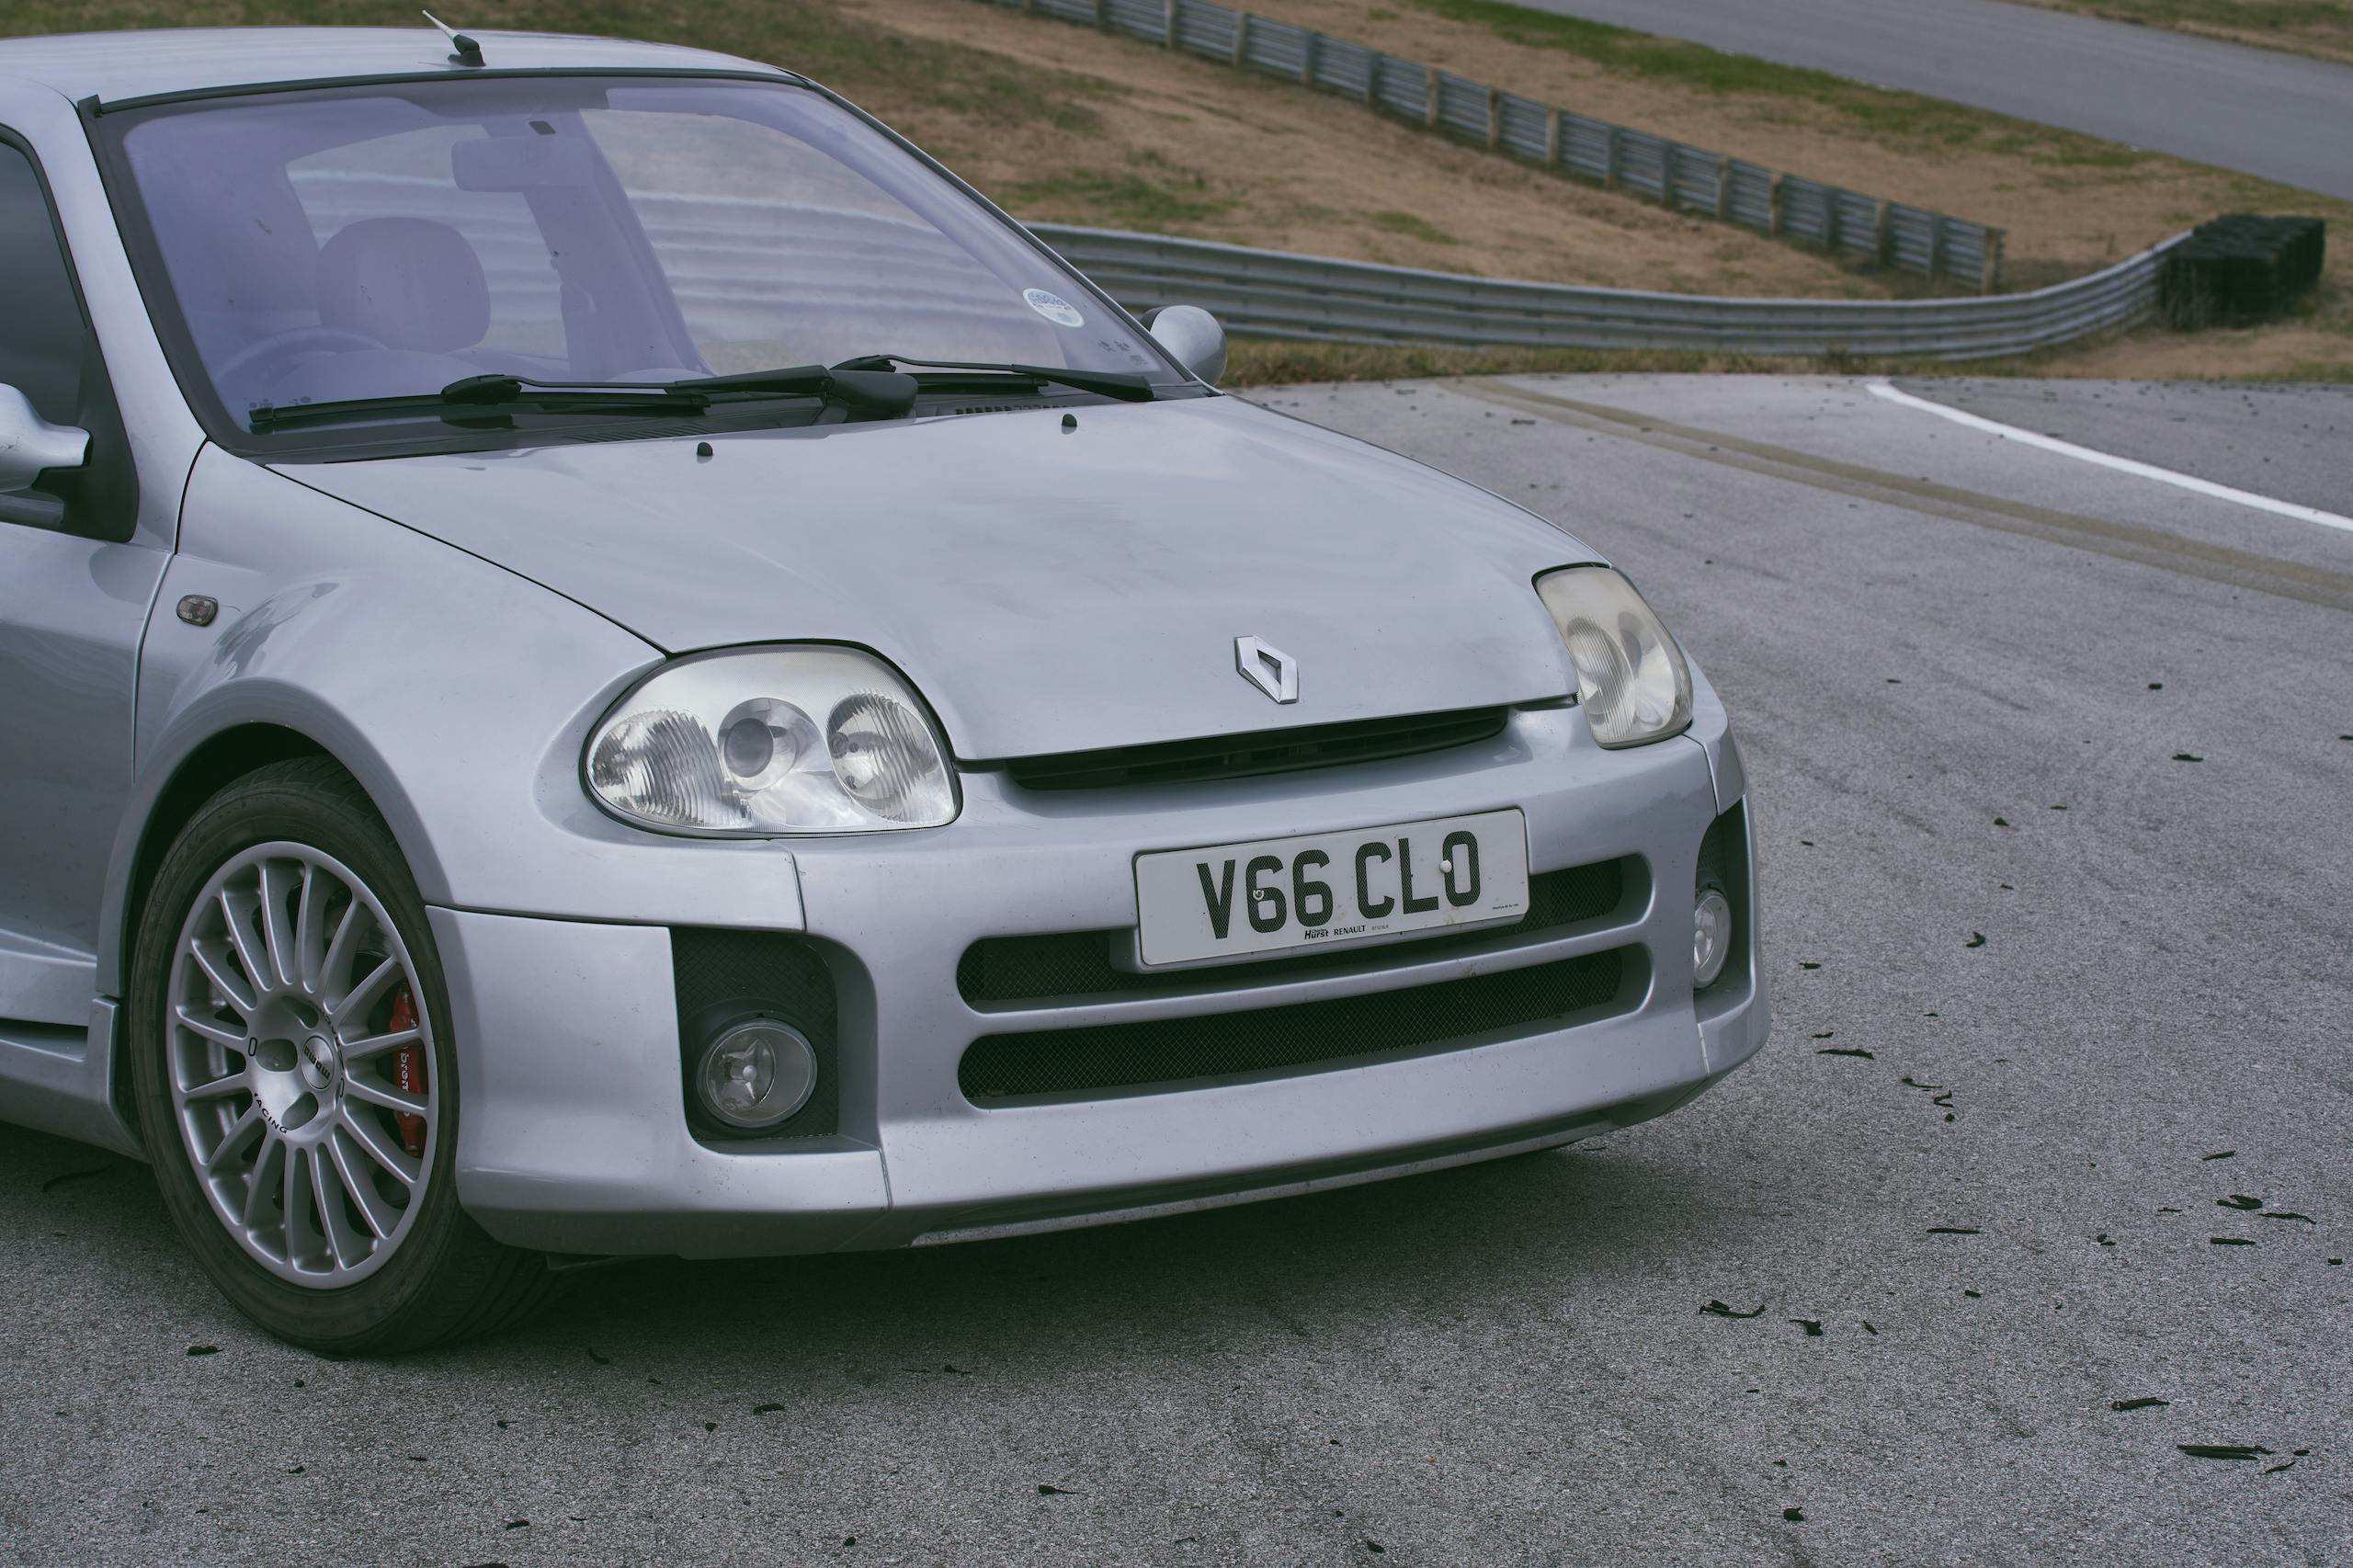 2002 Renault Clio V6 front